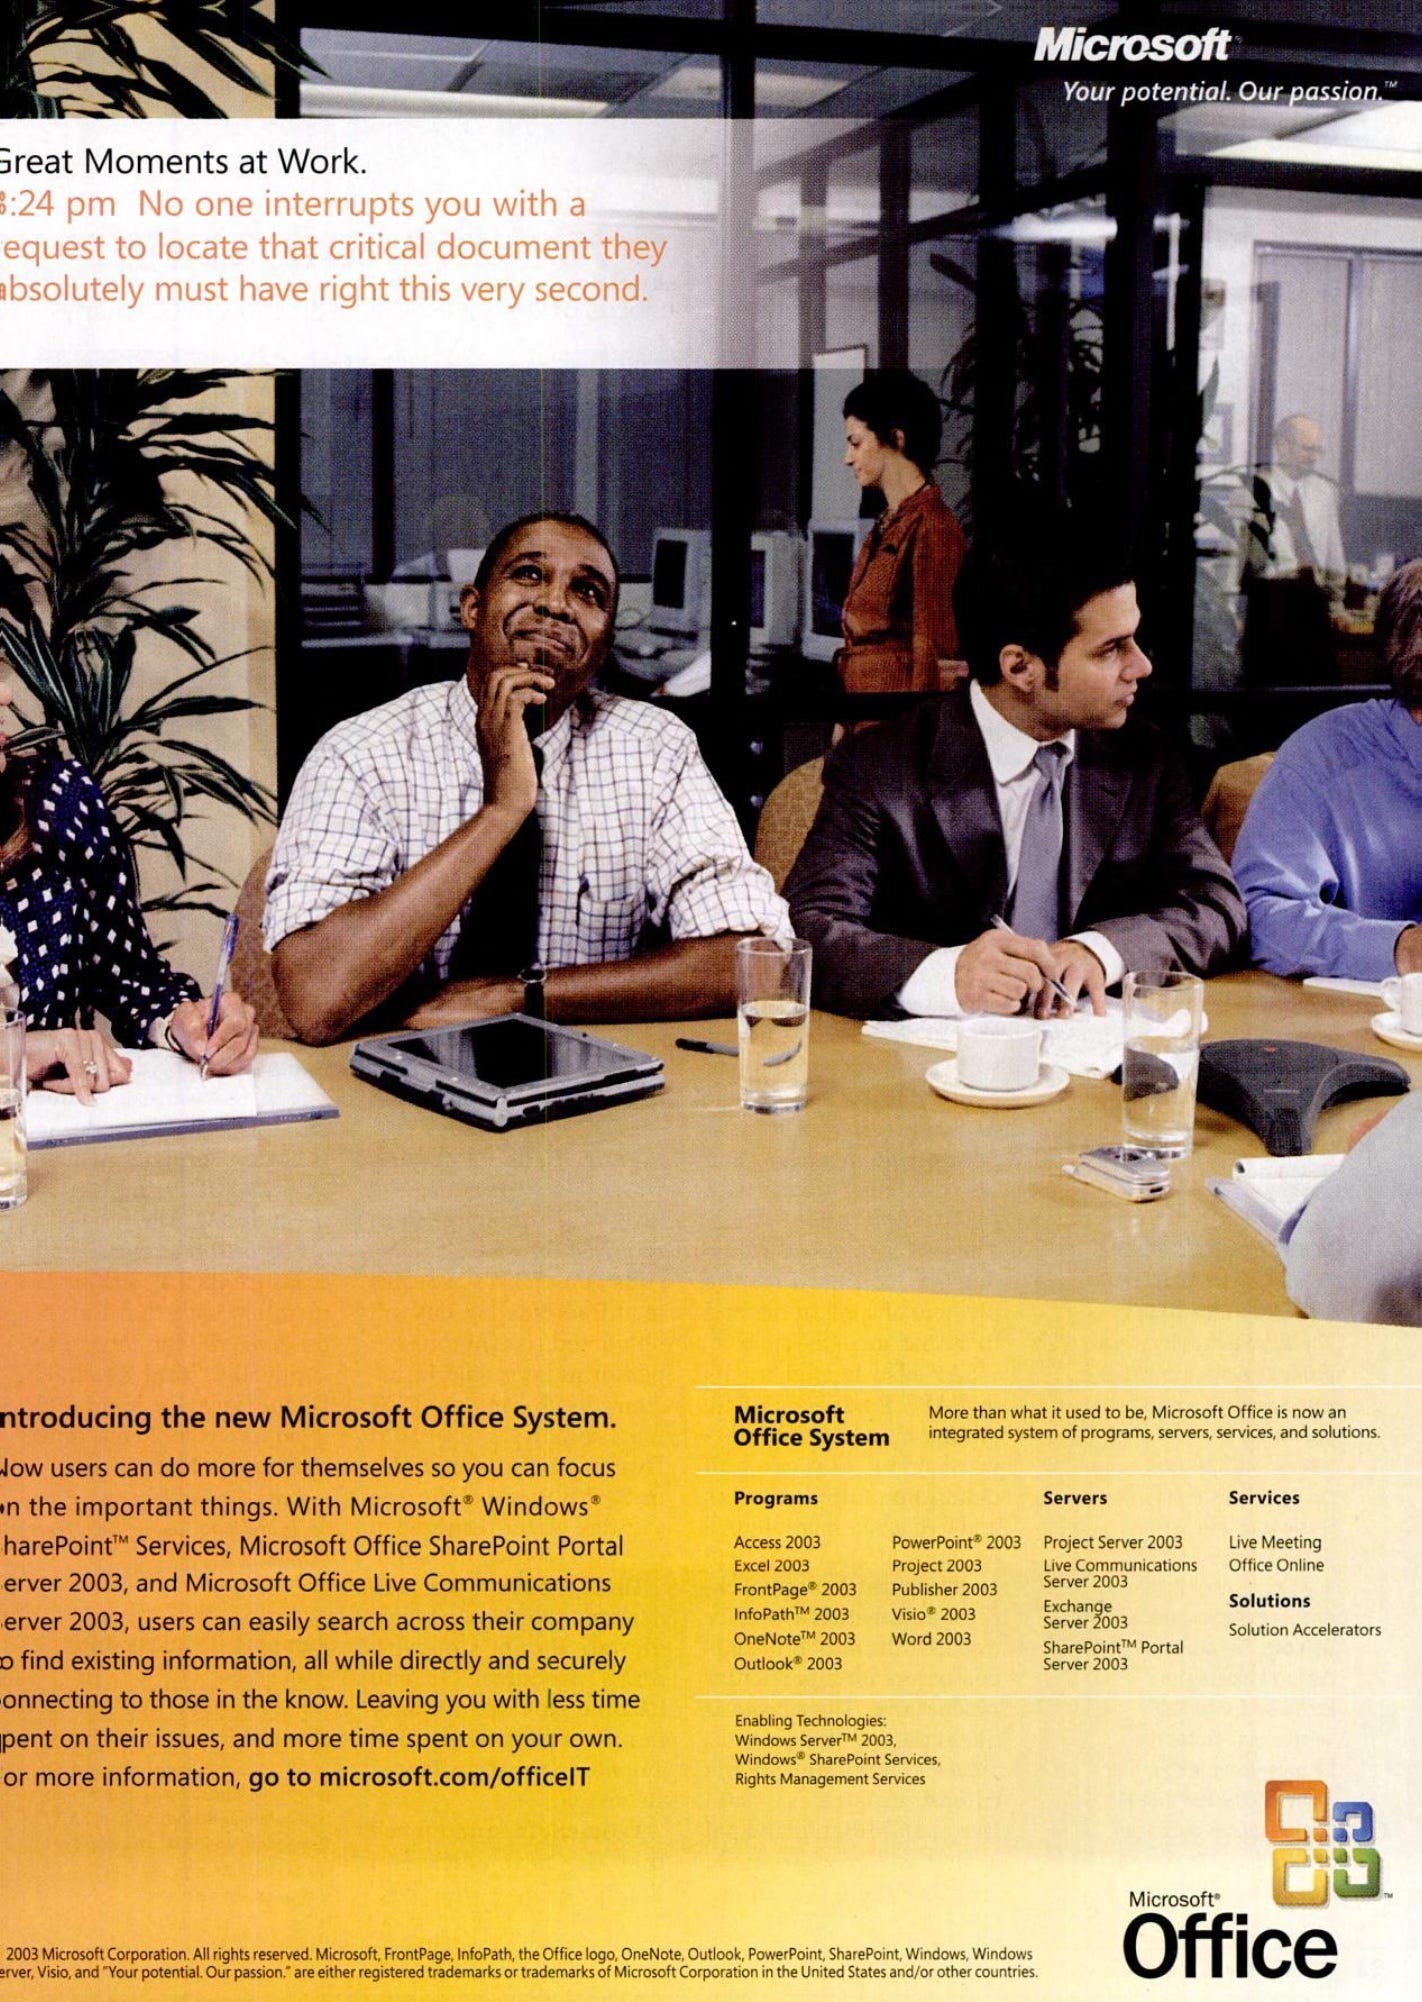 A full page color advertisement called "Great Moments at Work" featuring people at a table that looks like a meeting room. There's a thought bubble on one person with a tablet PC that says "No one interrupts you with a equest to locate that critical document they absolutely must have right this very second." along with a long description of the System and a list of all the programs, servers, and services.